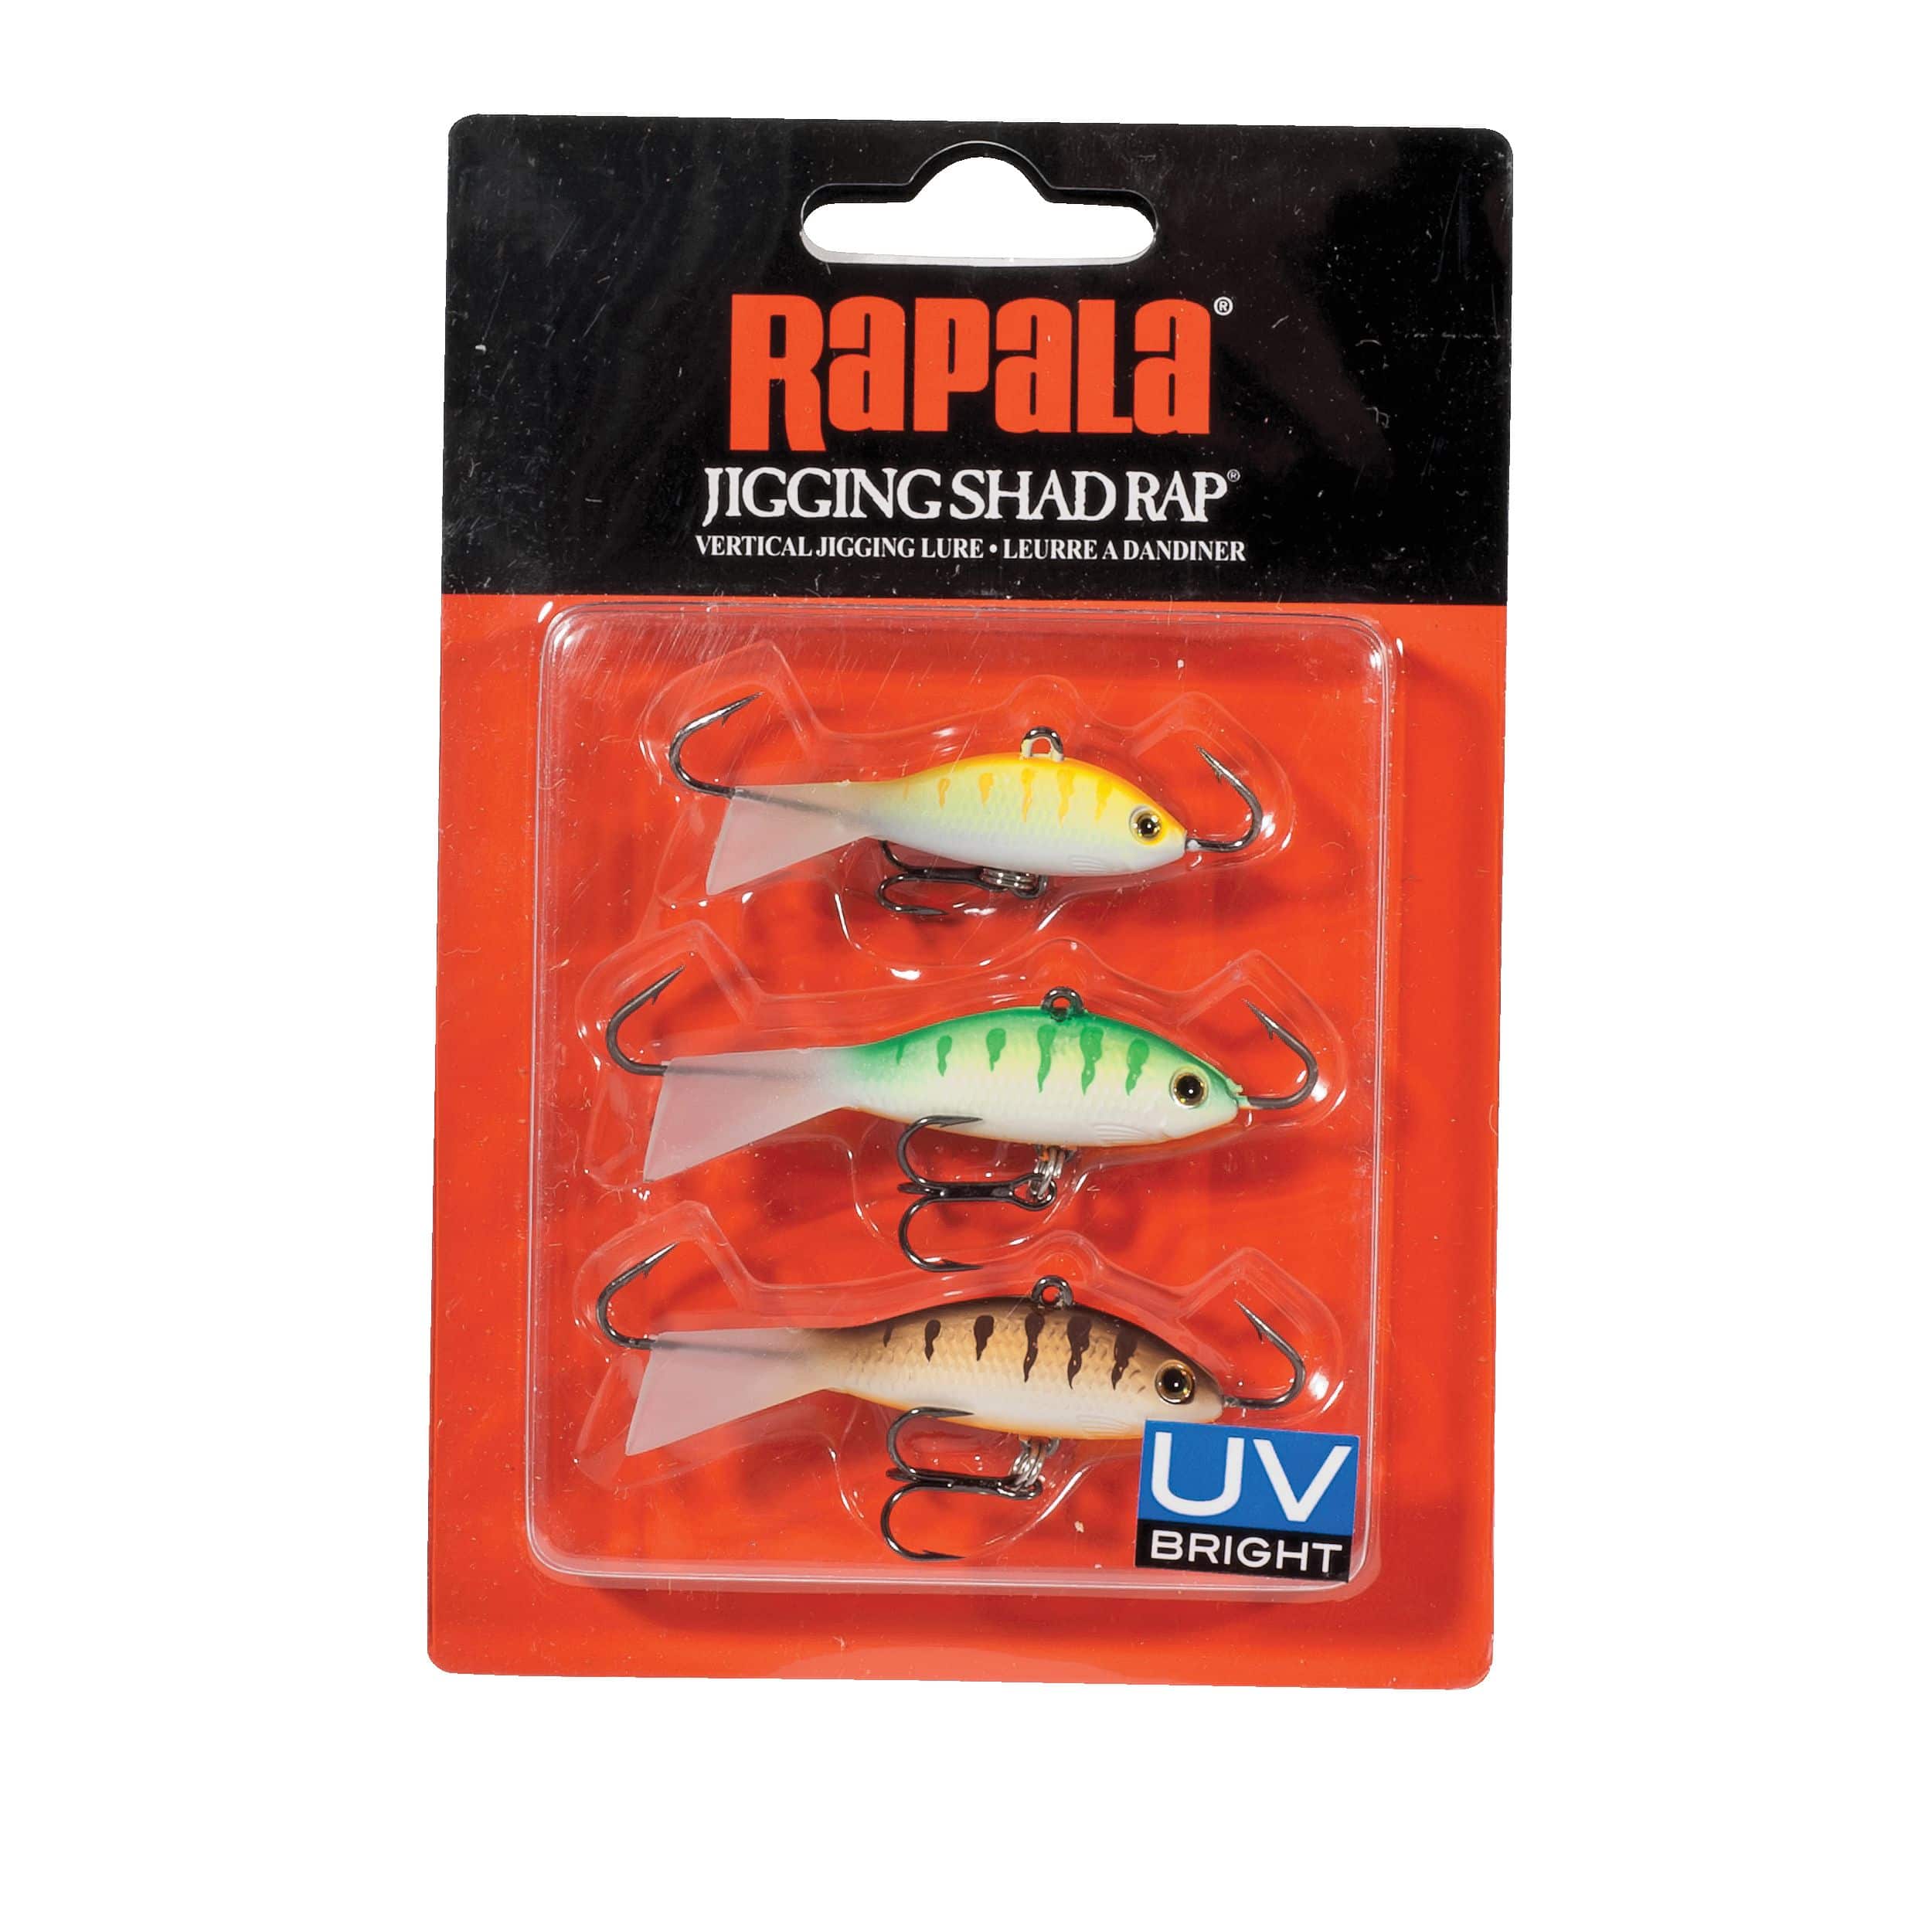 Rapala Large Fishing Lure Fish Store Display Sign 29  Long for